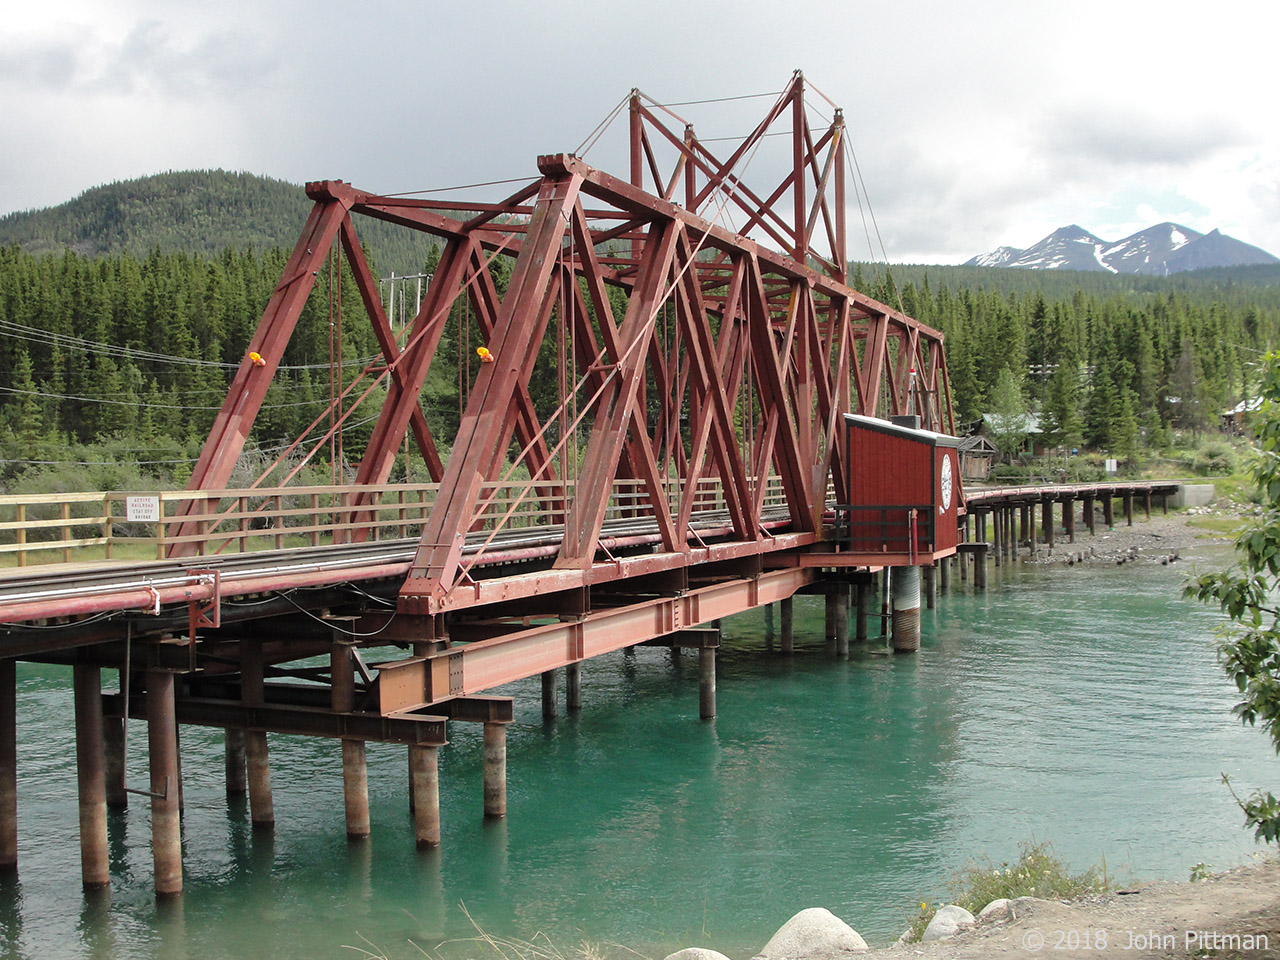 The most impressive bridge on the Canadian side of the White Pass & Yukon Route seems to be this one, crossing the narrows between Bennett Lake and Nares Lake at Carcross Yukon. Carcross is a contraction of caribou crossing, which presumably was a common occurrence here when the town was named.
It appears that this bridge was built as a swing bridge, so that it would not impede the riverboat traffic on this waterway. Riverboat transportation has ended, and there are fixed bridges either side of this one - for the Yukon Highway and a footbridge. So it made sense to strengthen this railway bridge from below with additional steel and supports, rendering it immovable. Note also the conduit pipes and wires that crossing the bridge. 
Carcross WP&YR station is a short distance behind this viewpoint, with the end of in-service track probably less than a mile past that. The active track can be seen curving to the right, as the line follows the east shore of Lake Bennett southward toward Bennett, Fraser, and Skagway.